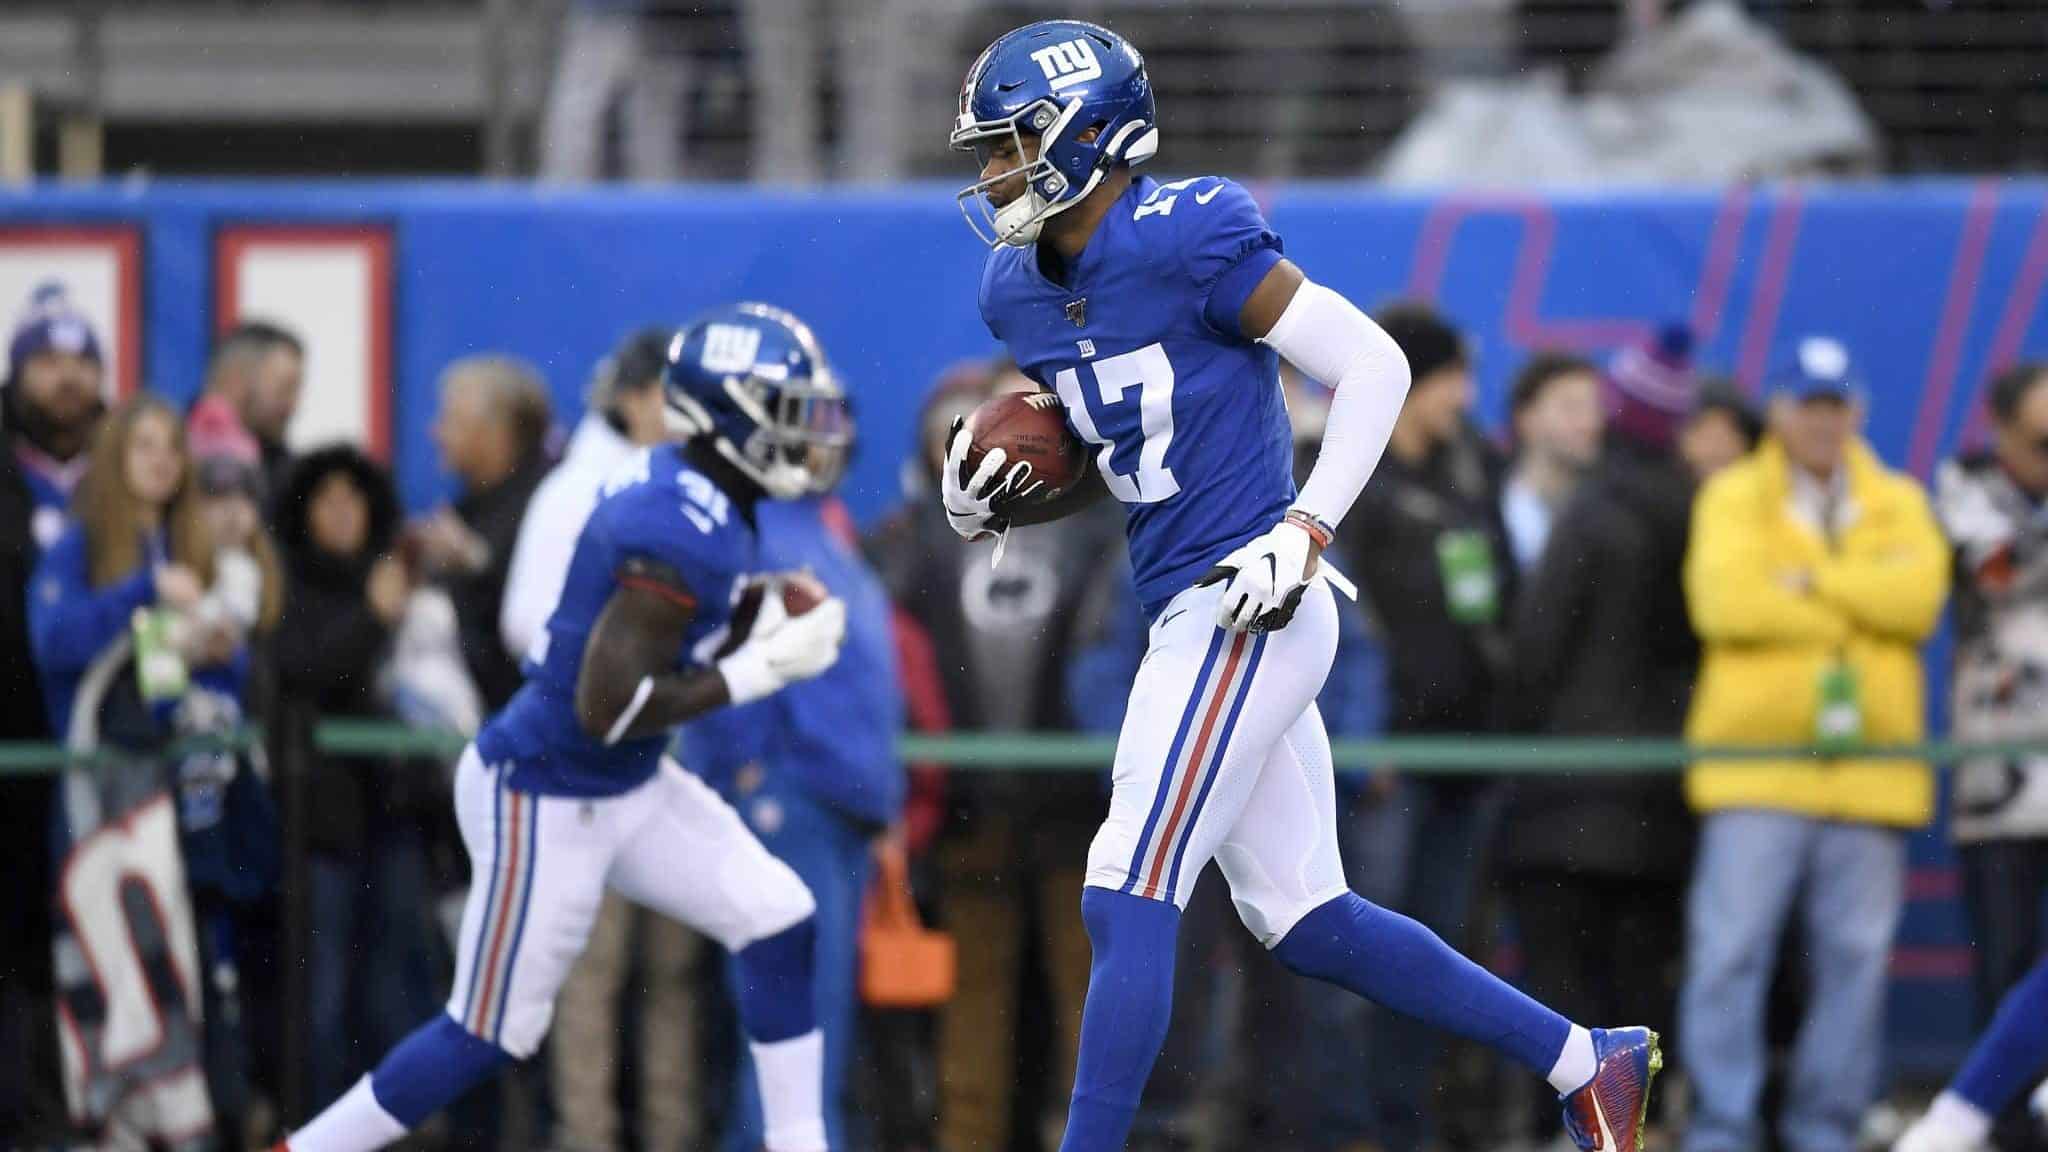 EAST RUTHERFORD, NEW JERSEY - DECEMBER 29: Cody Core #17 of the New York Giants warms up prior to the game against the Philadelphia Eagles at MetLife Stadium on December 29, 2019 in East Rutherford, New Jersey.